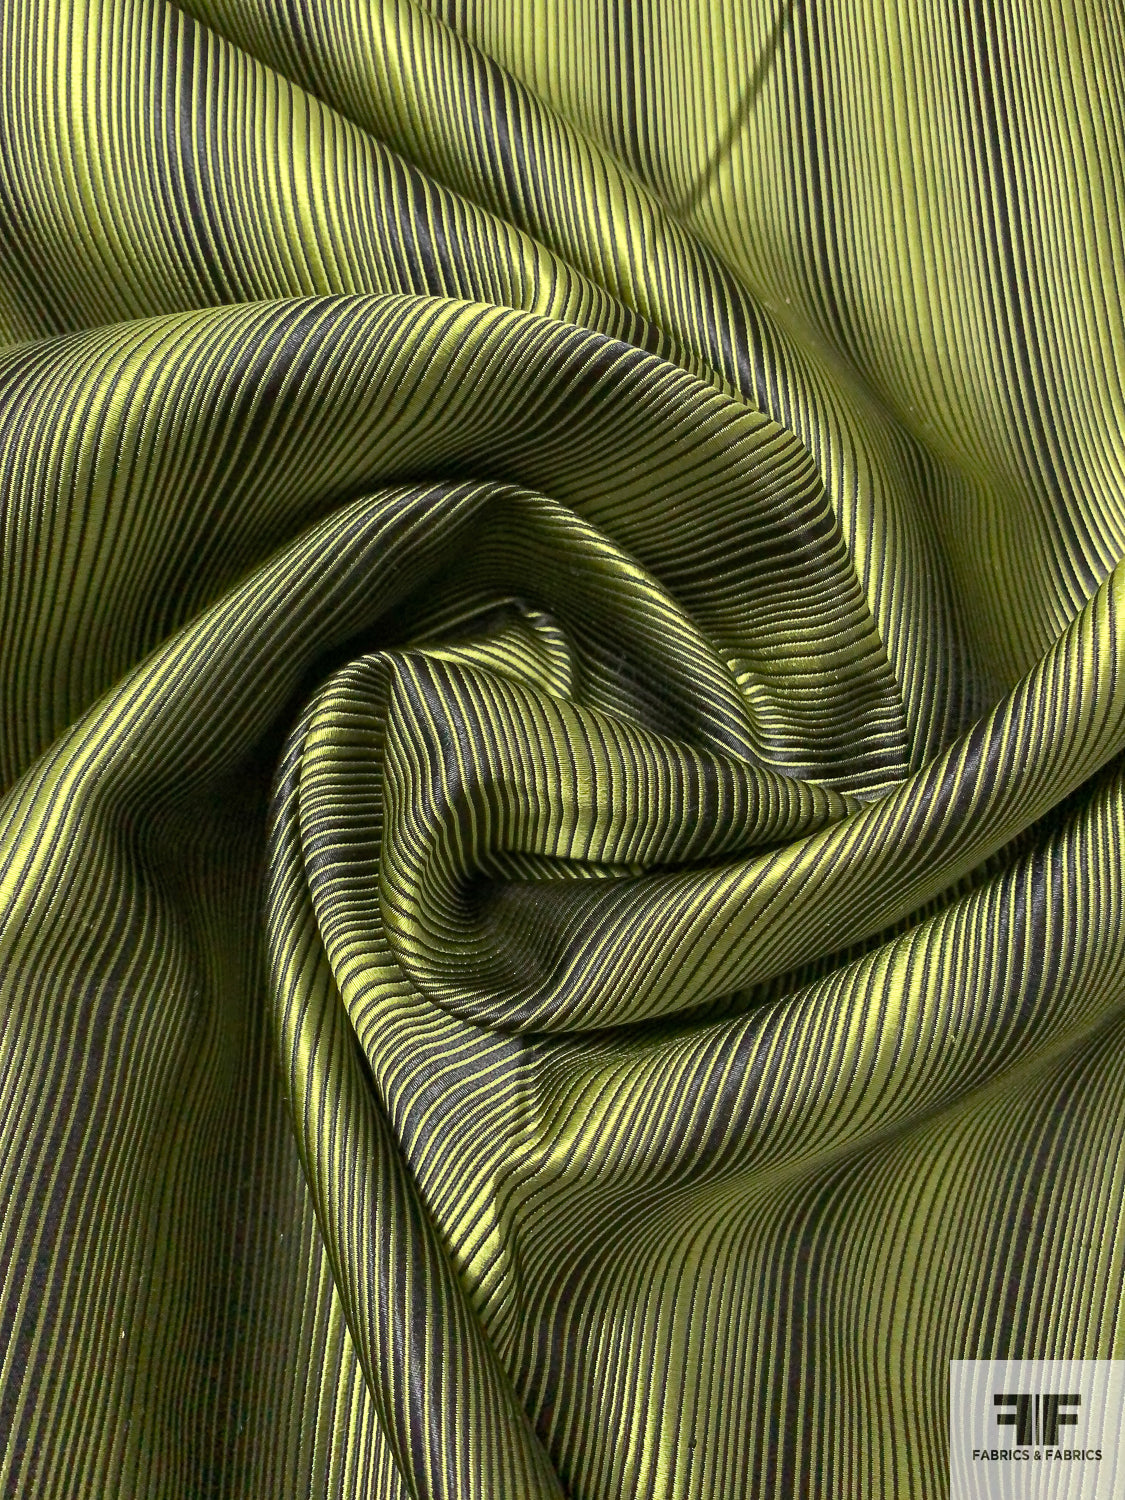 Olive Green Plain Solid Tweed Textures Upholstery Fabric by The Yard